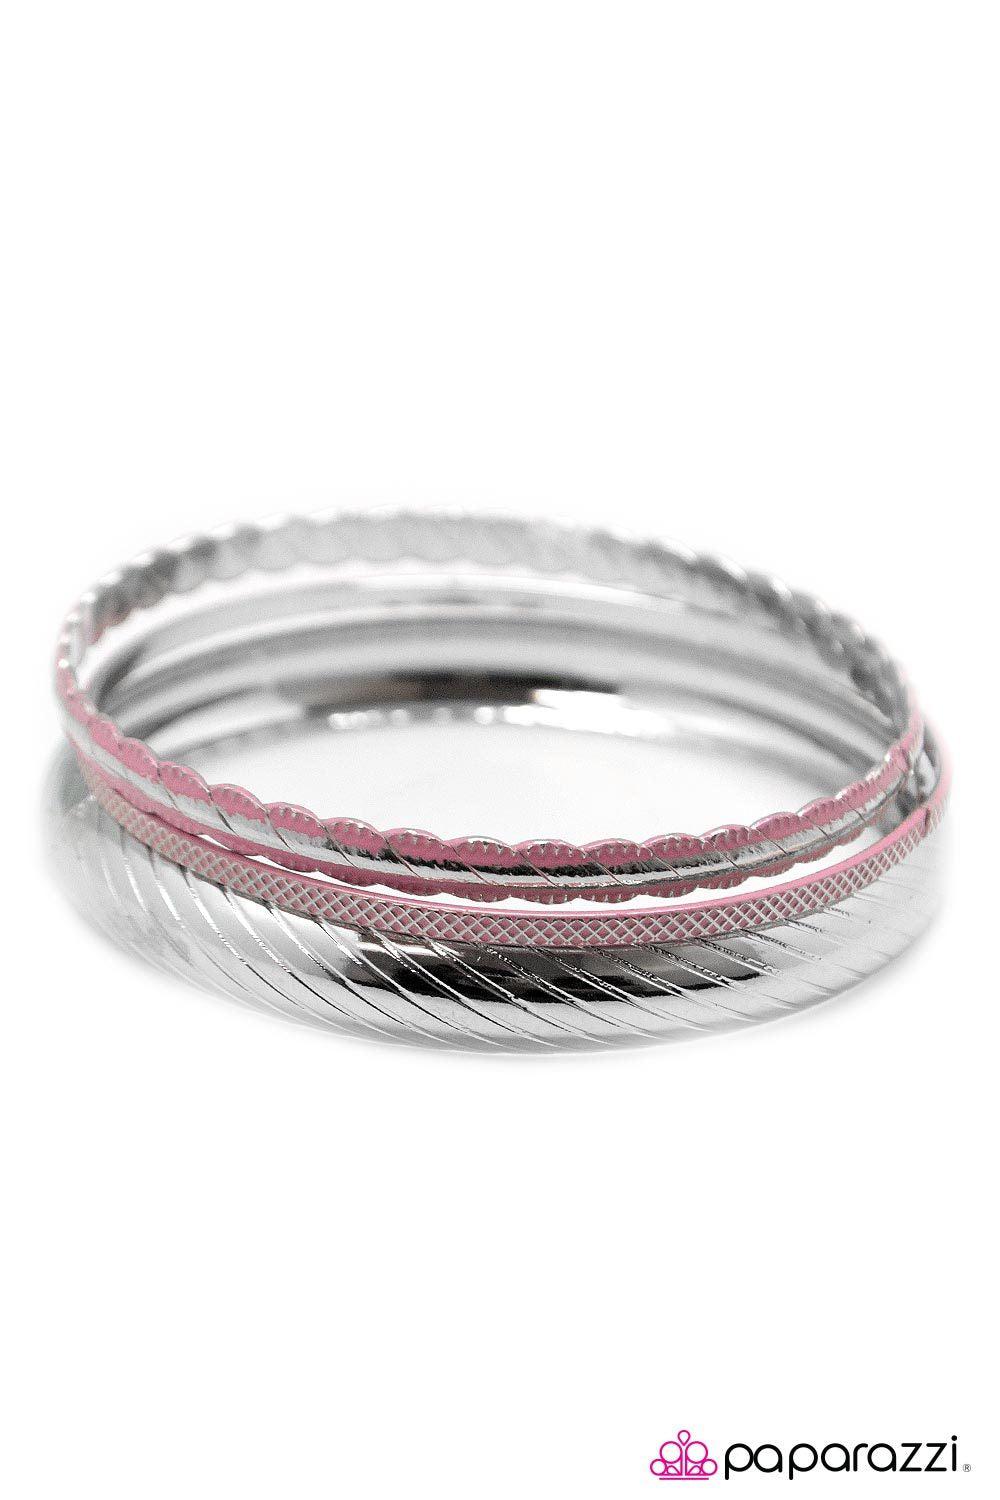 In High Spirits Pink and Silver Bangle Bracelet Set - Paparazzi Accessories-CarasShop.com - $5 Jewelry by Cara Jewels